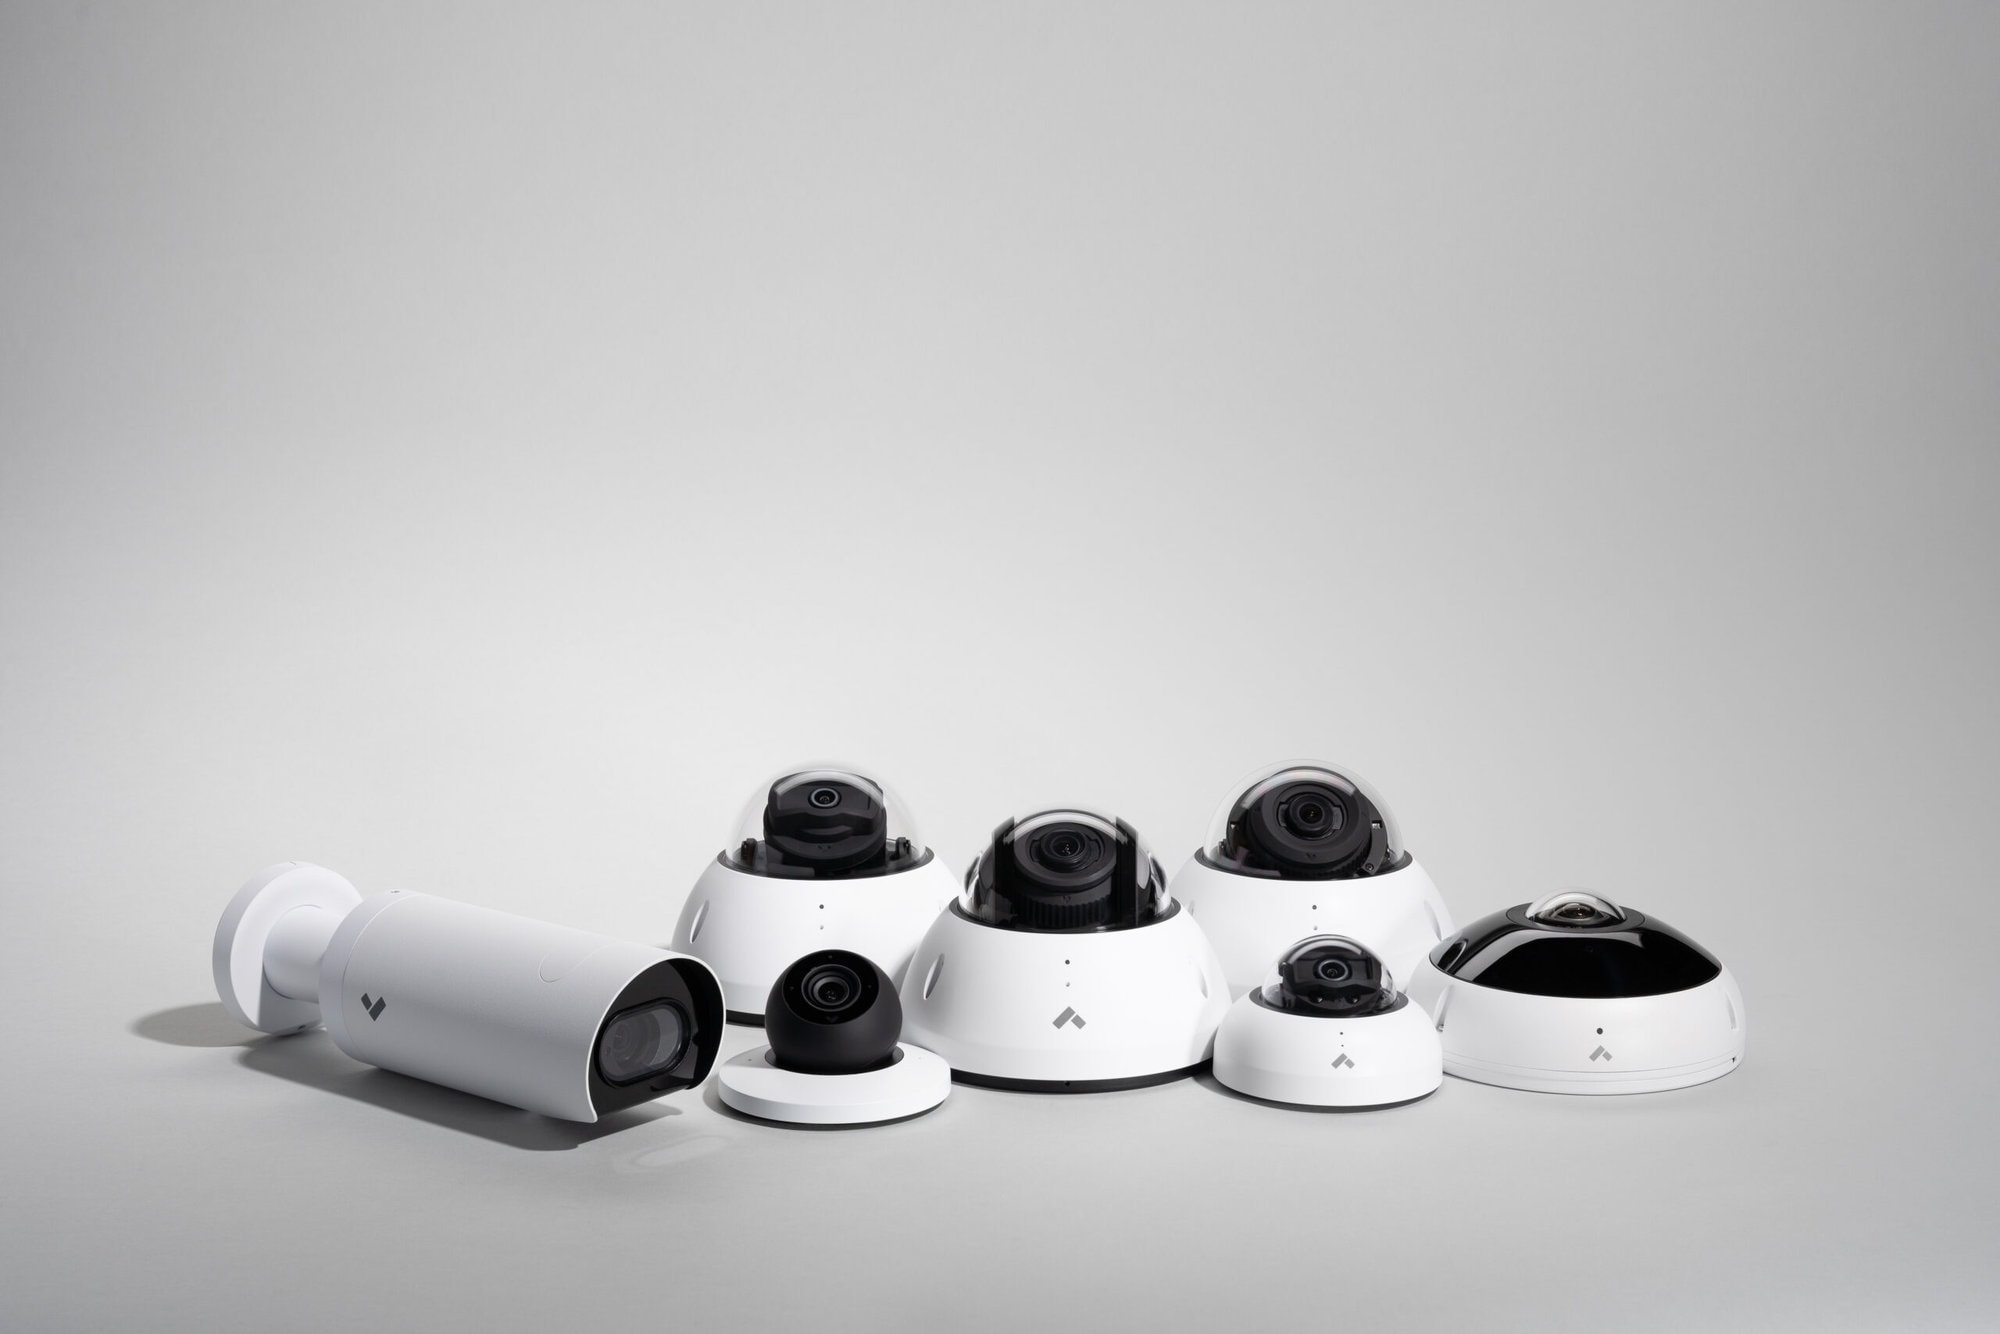 A collection of white IP cameras captured against a plain grey backdrop highlighting the NVR meaning and DVR meaning.